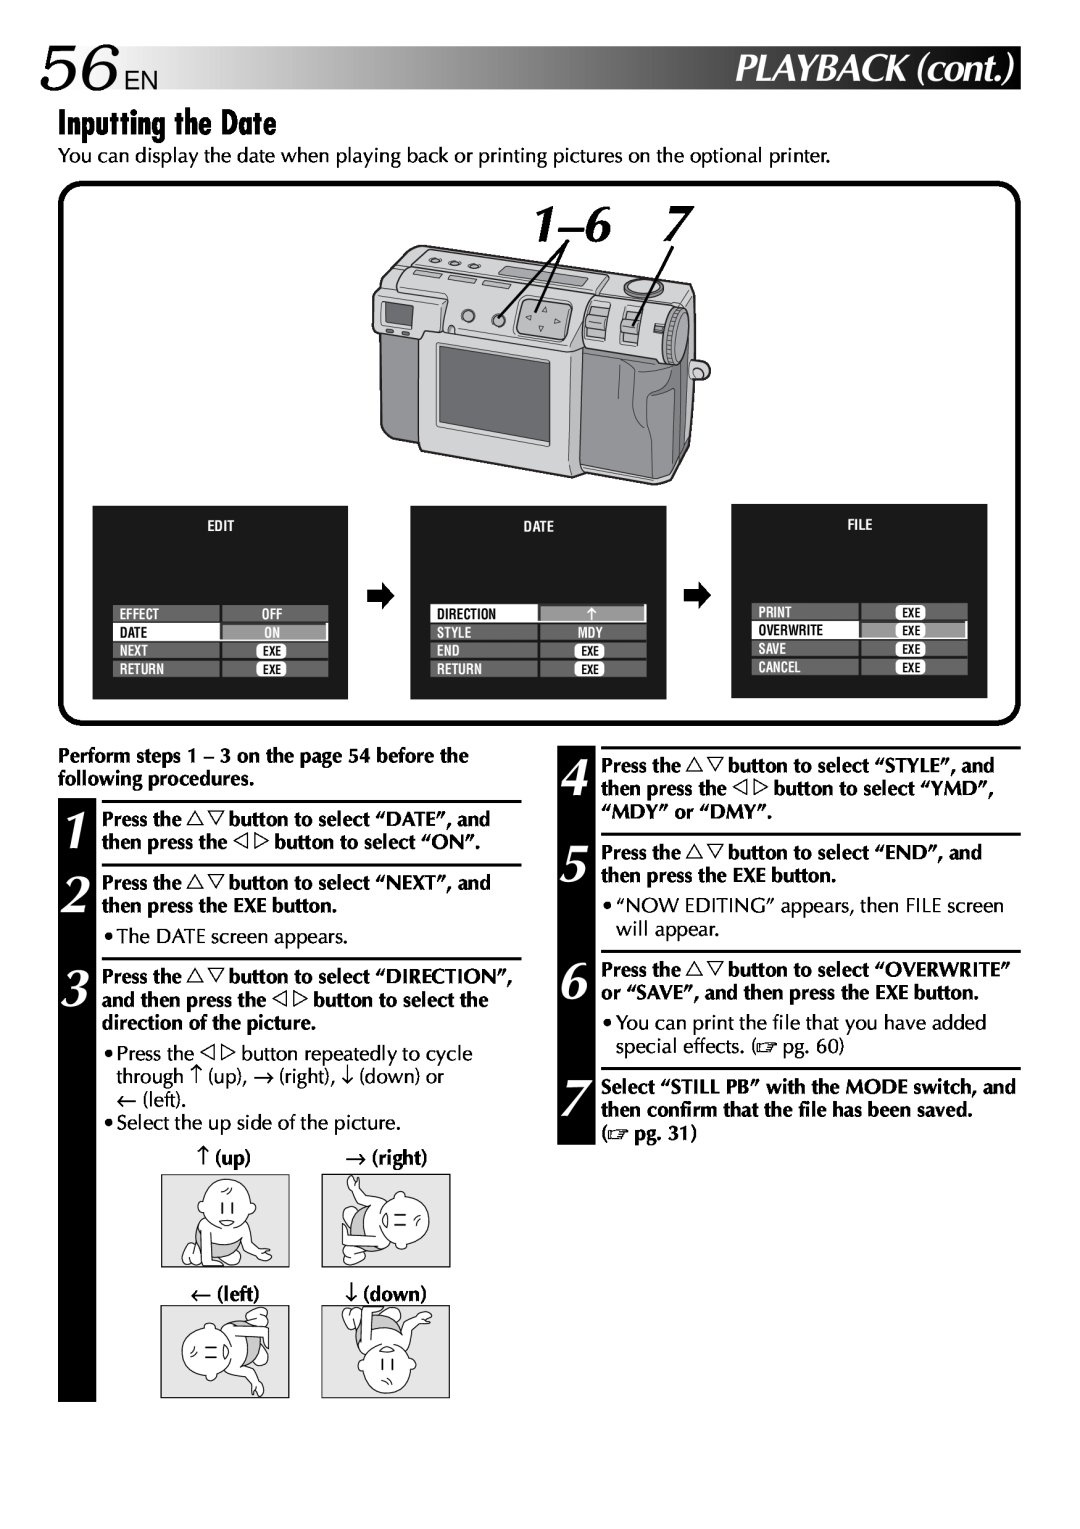 JVC GC-QX3 56ENPLAYBACKcont, Inputting the Date, Perform steps 1 - 3 on the page 54 before the following procedures, up 